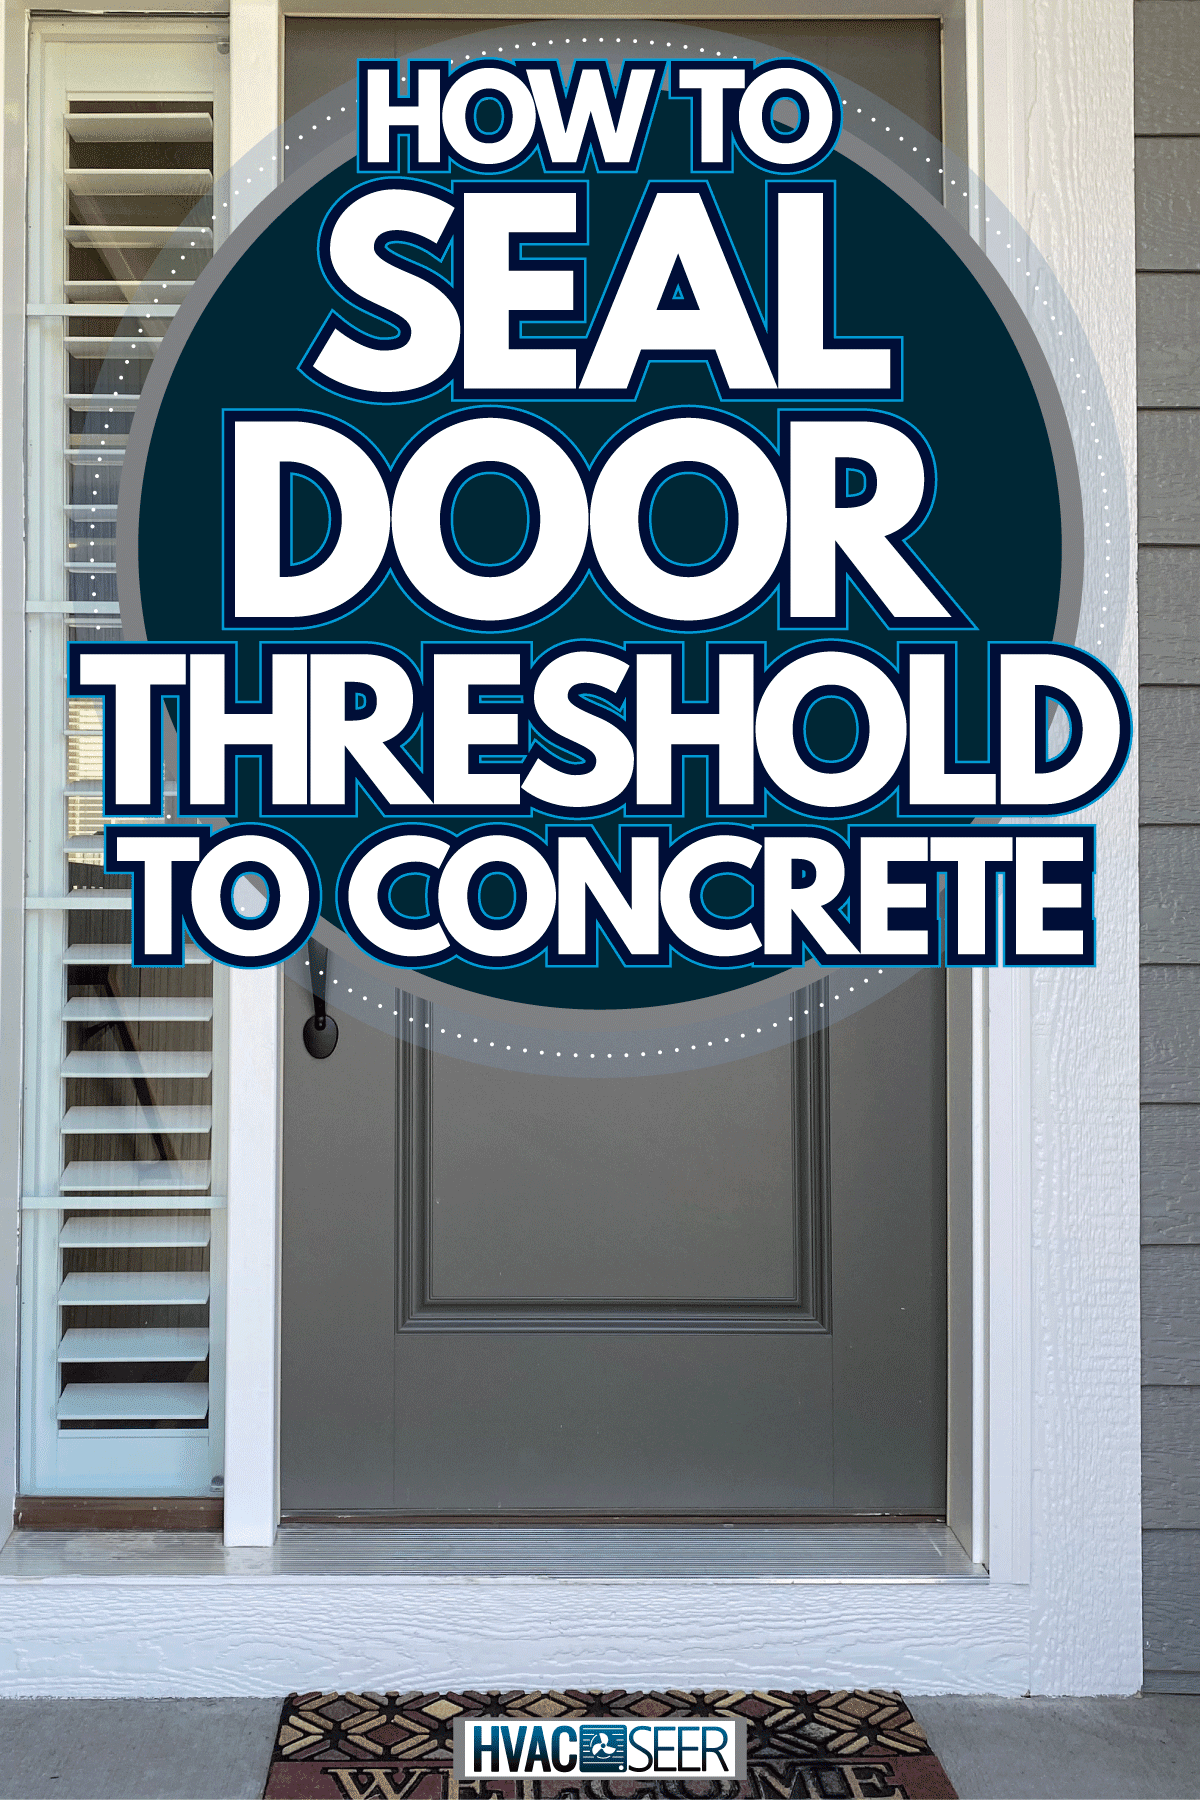 Gray front door with white trims and window panes with blinds, How To Seal Door Threshold To Concrete